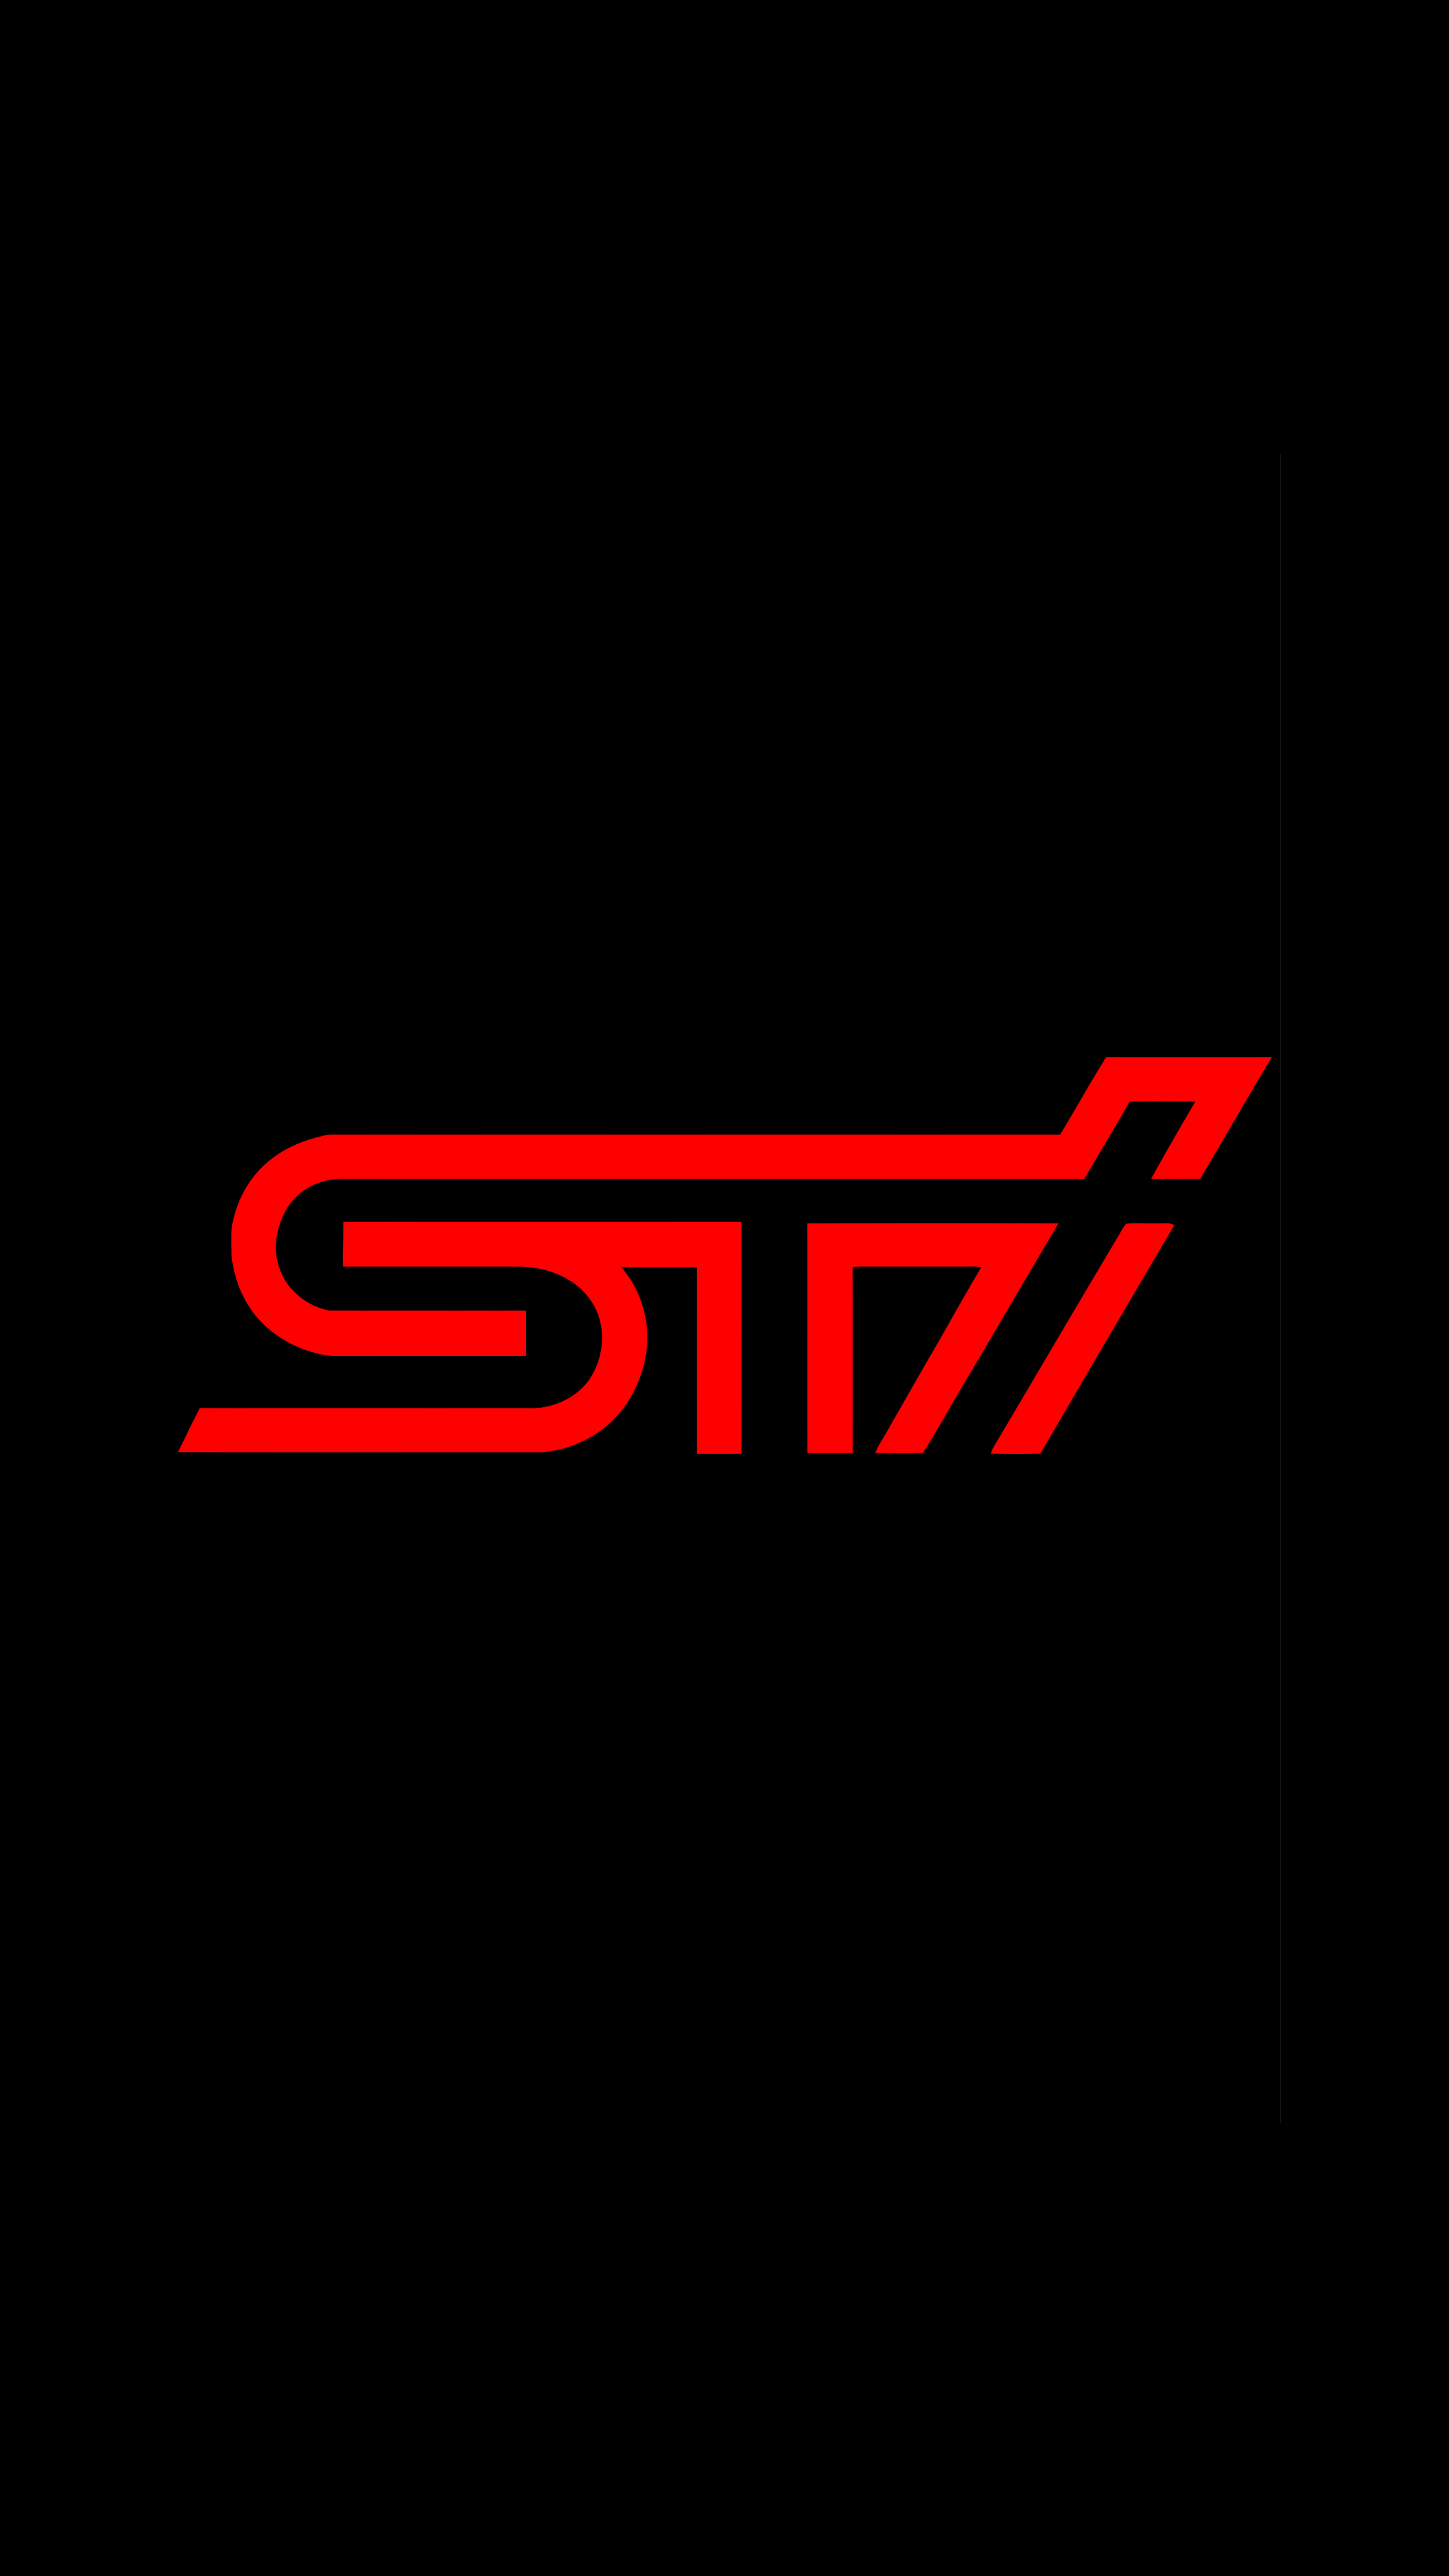 I Made This Sti Wallpaper For A Request On Another Sub Was Told